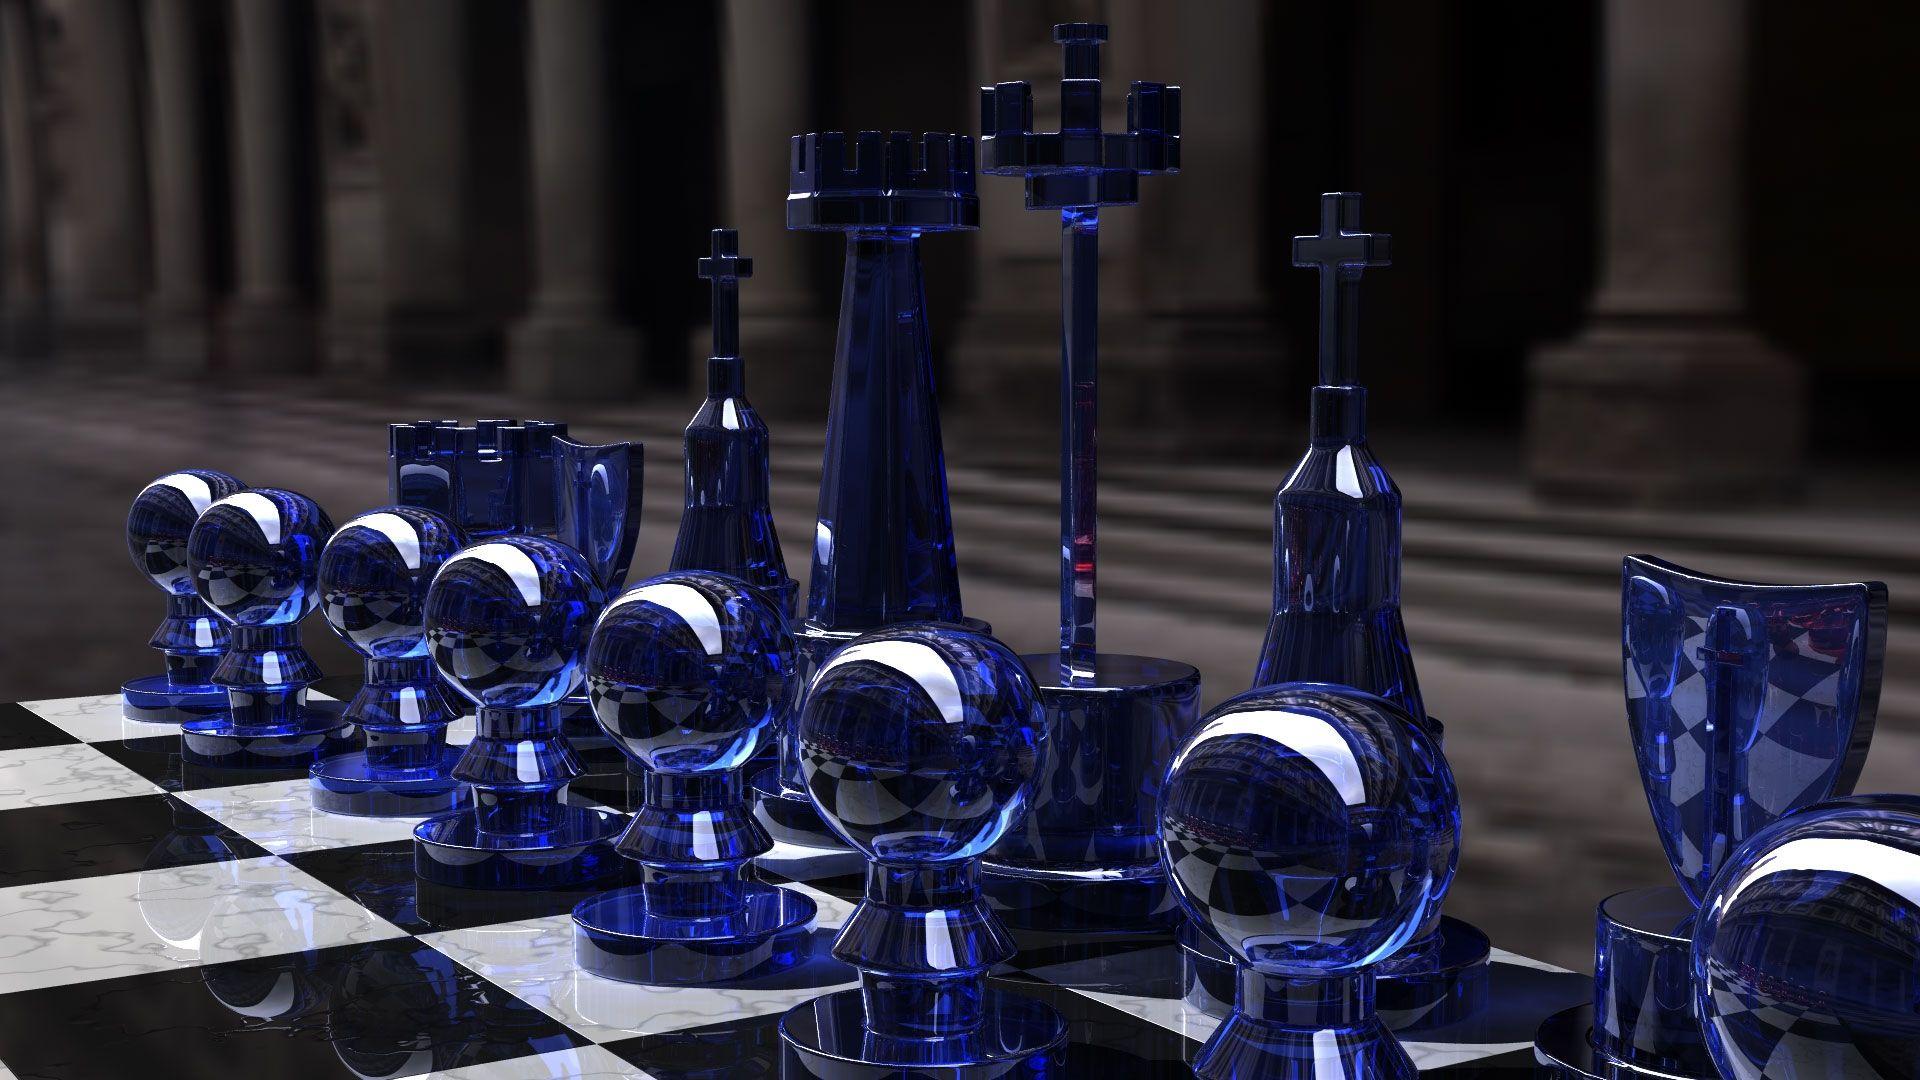 Download Wallpaper 1920x1080 chess, silver, glass, table, form Full